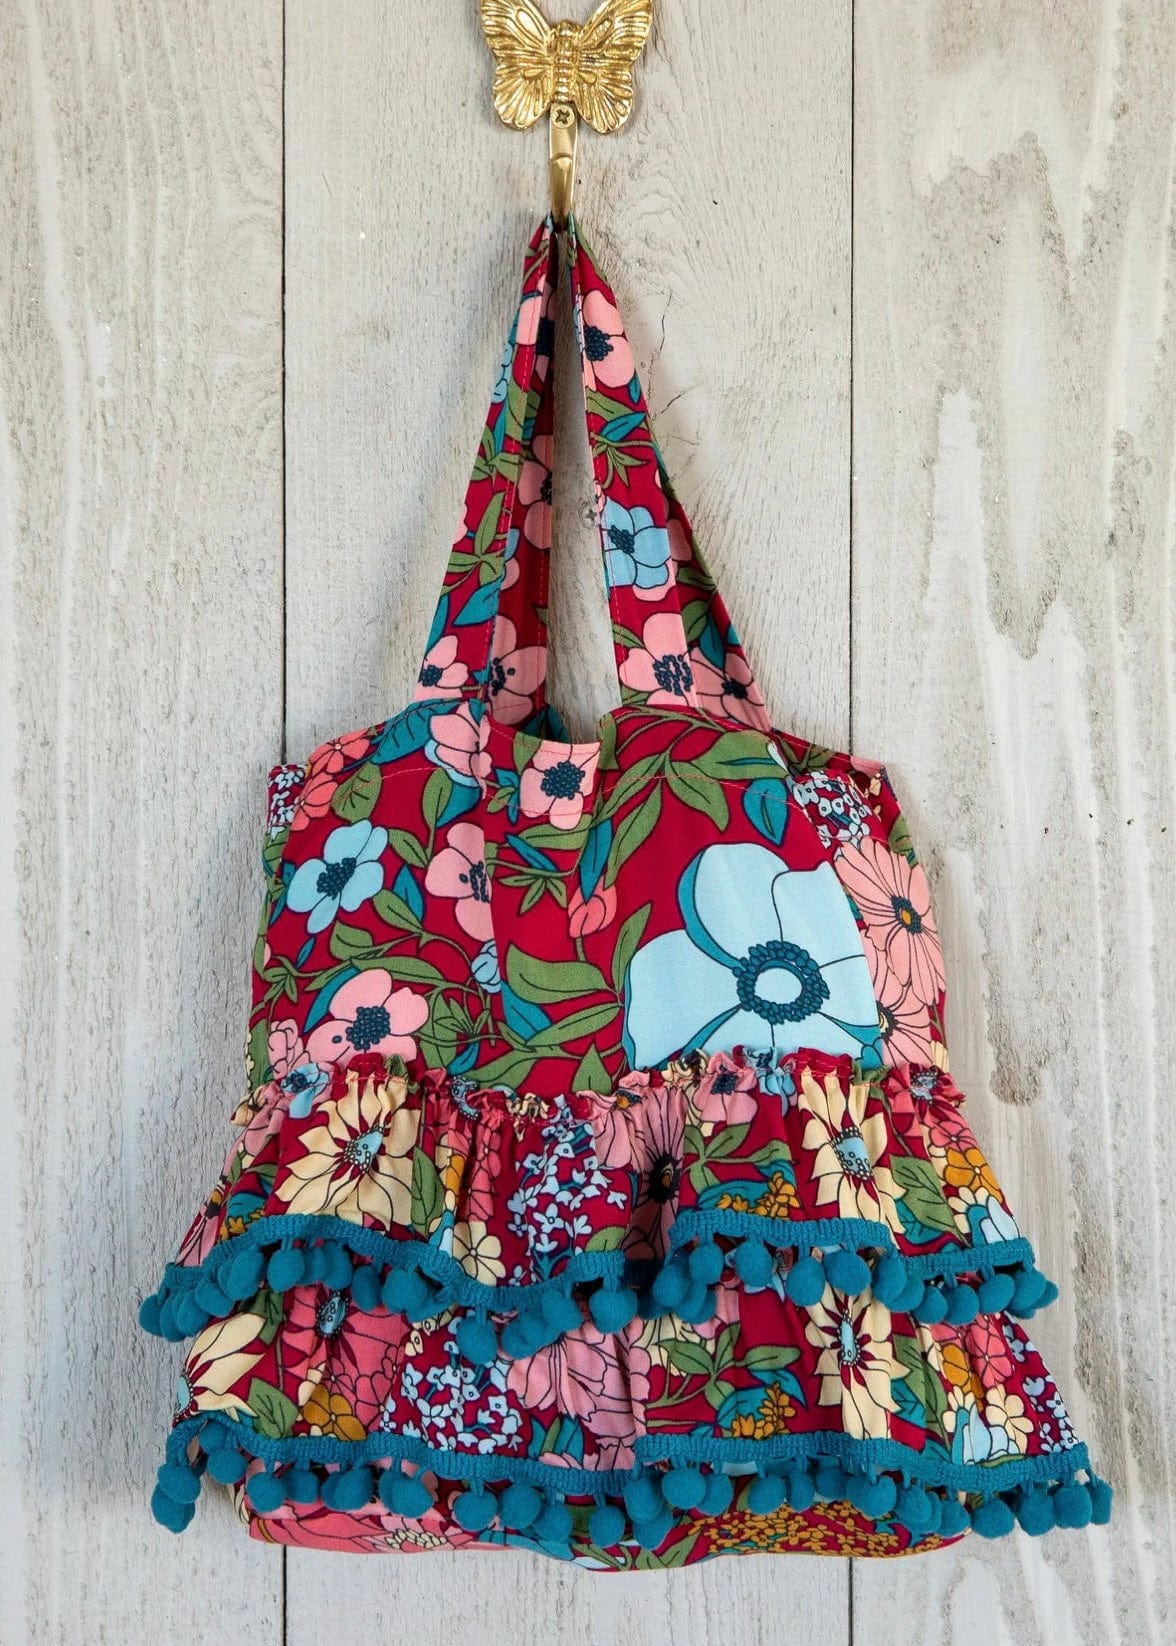 Mini Ruffle Tote - Red Floral Natural Life Accessories